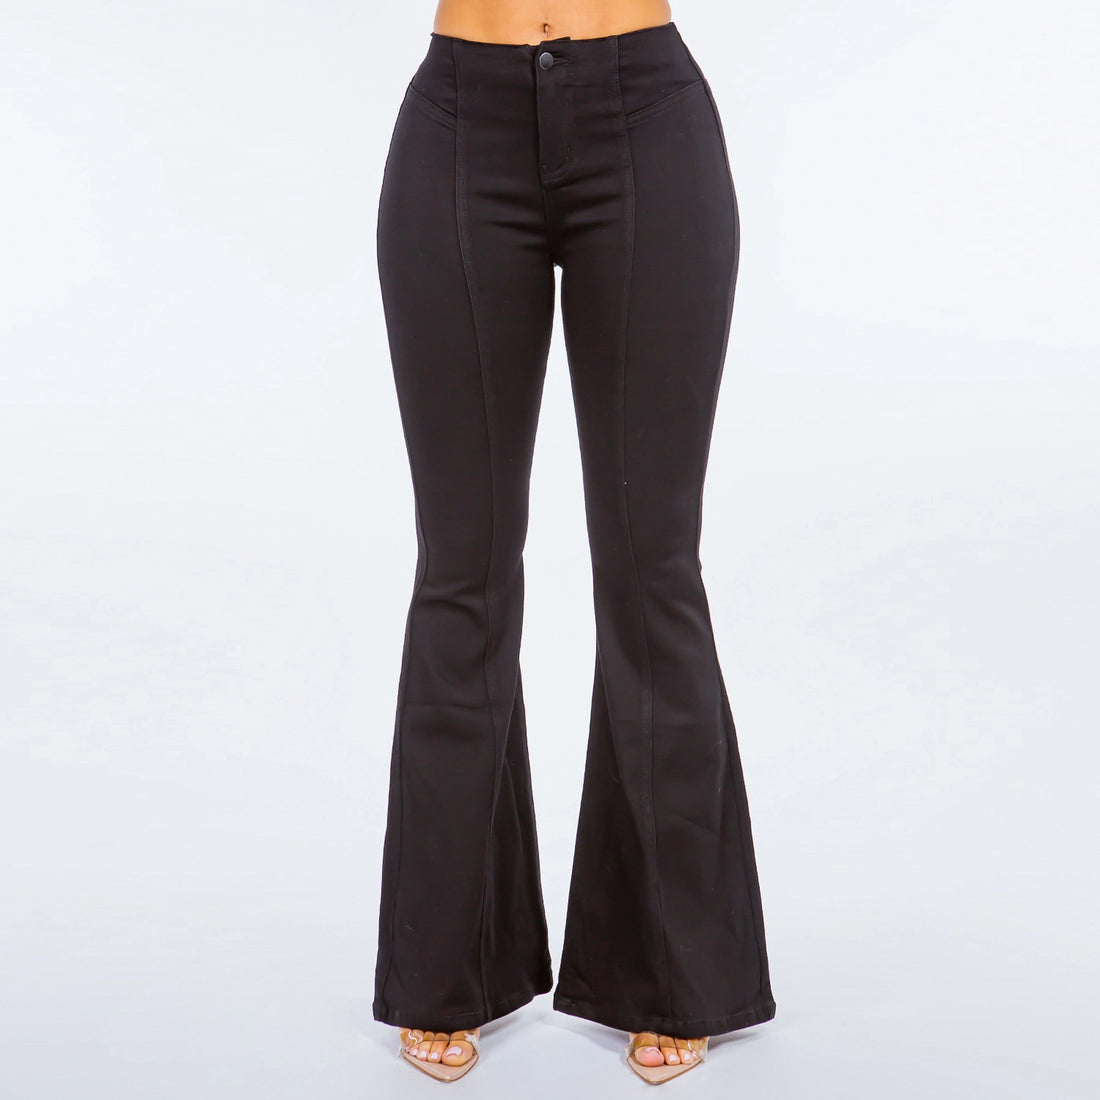 Bianca High Waisted Pull On Flare Jeans - Black